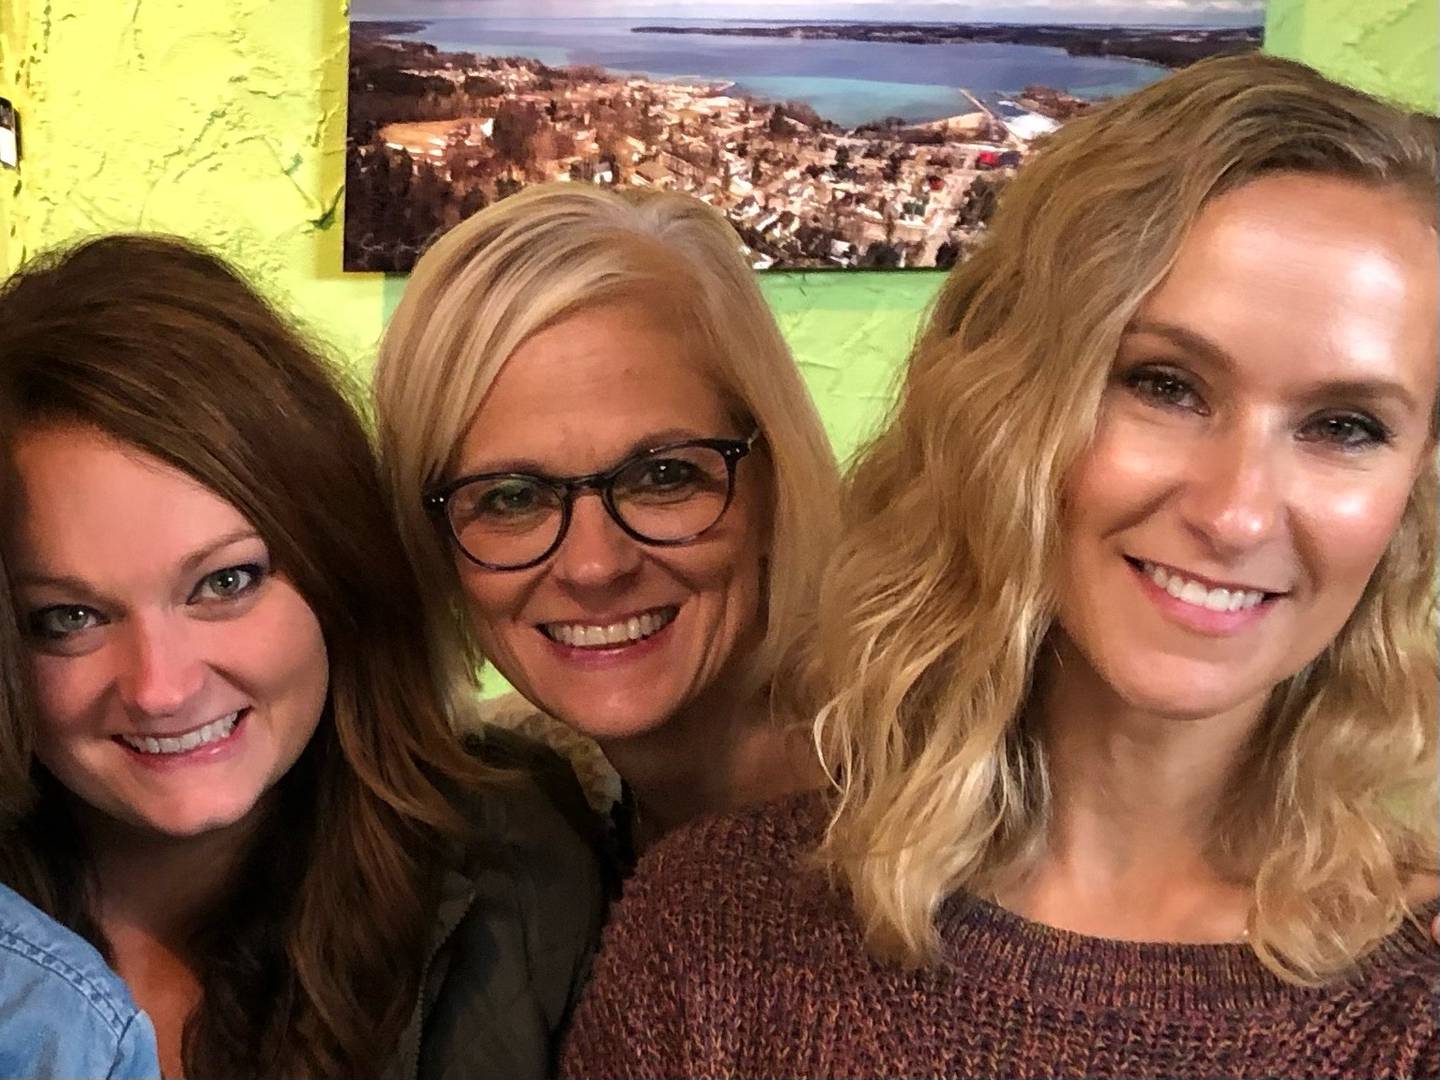 Amy Goedken, (left) Cathy Humphreys and Mary Humphreys will open the Up North Wine Tasting Room in downtown Geneva on Friday. The concept is inspired by their visits to Northern Michigan wineries, like the sustainably-focused Shady Lane Cellars in Sutton’s Bay.